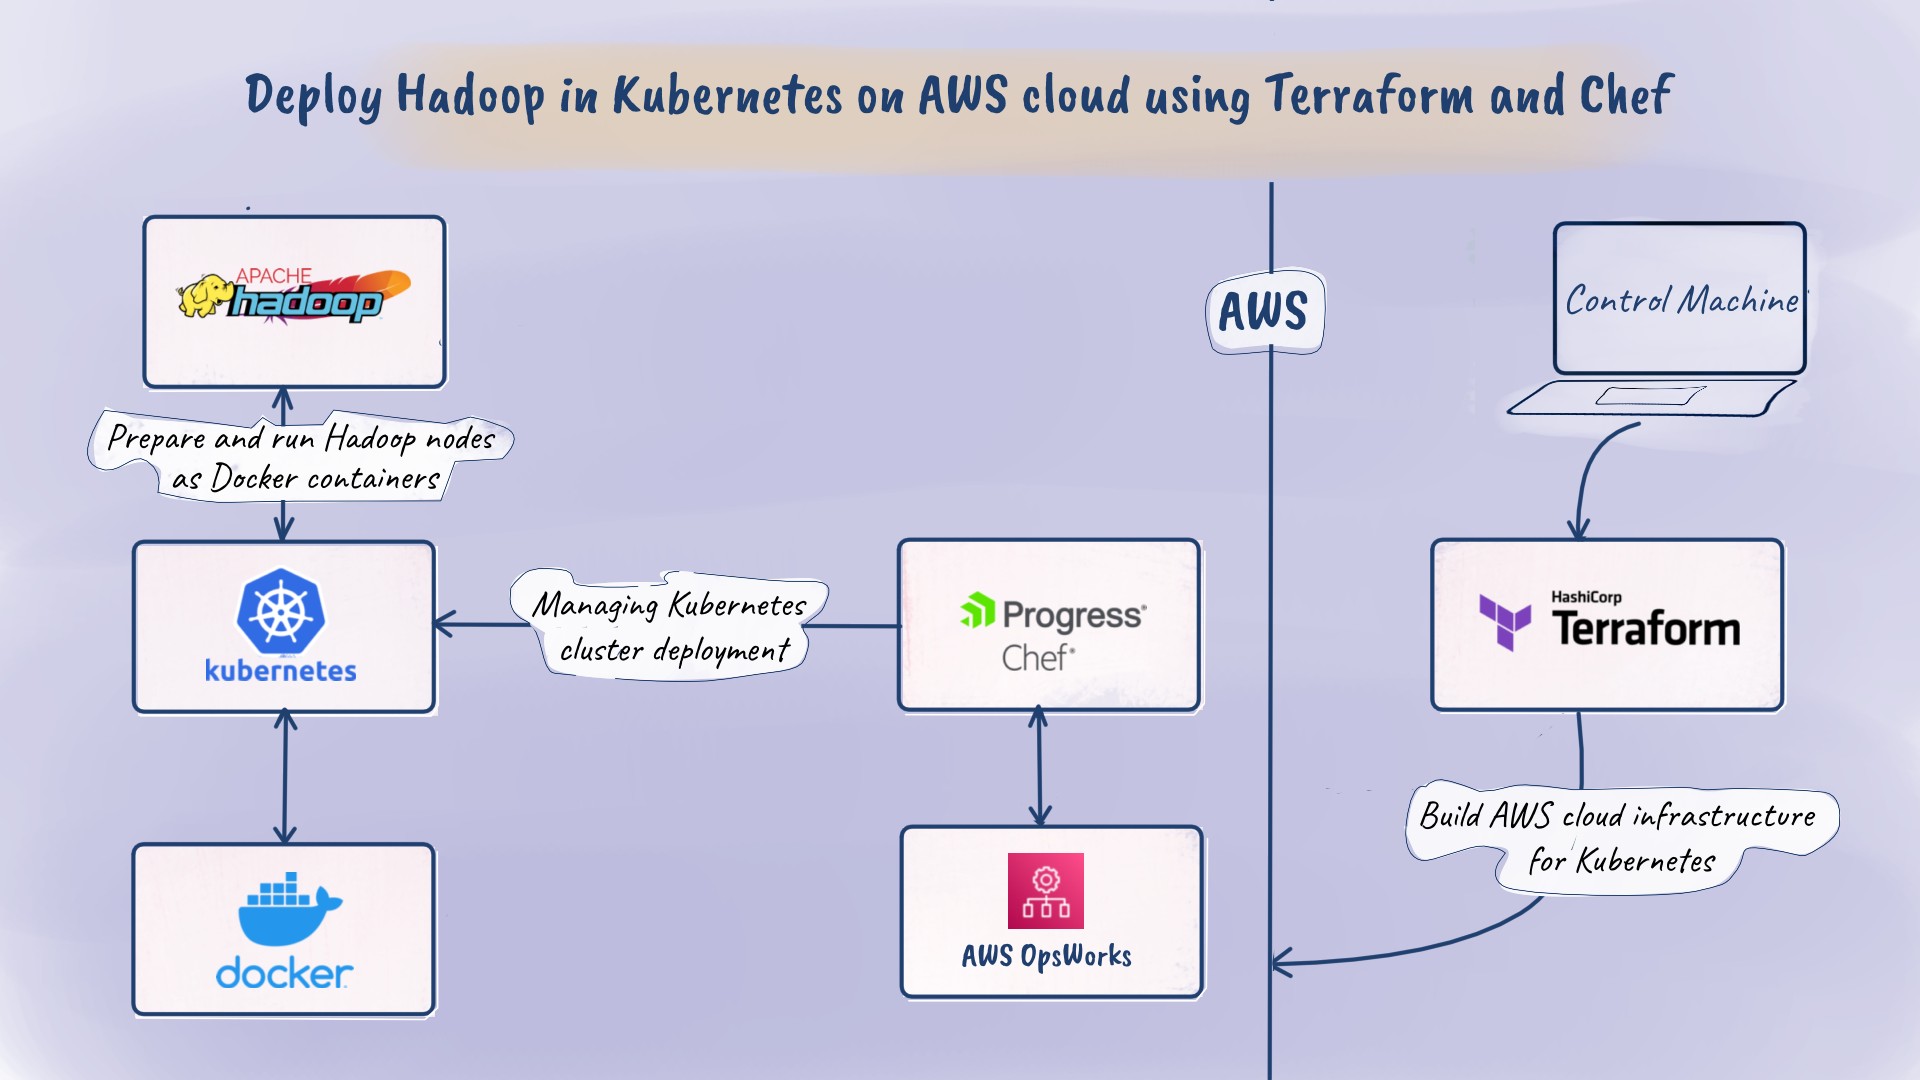 A flow diagram explains how to deploy Hadoop in Kubernetes on the AWS cloud using Terraform and Chef. Every component is highlighted like a sticker.